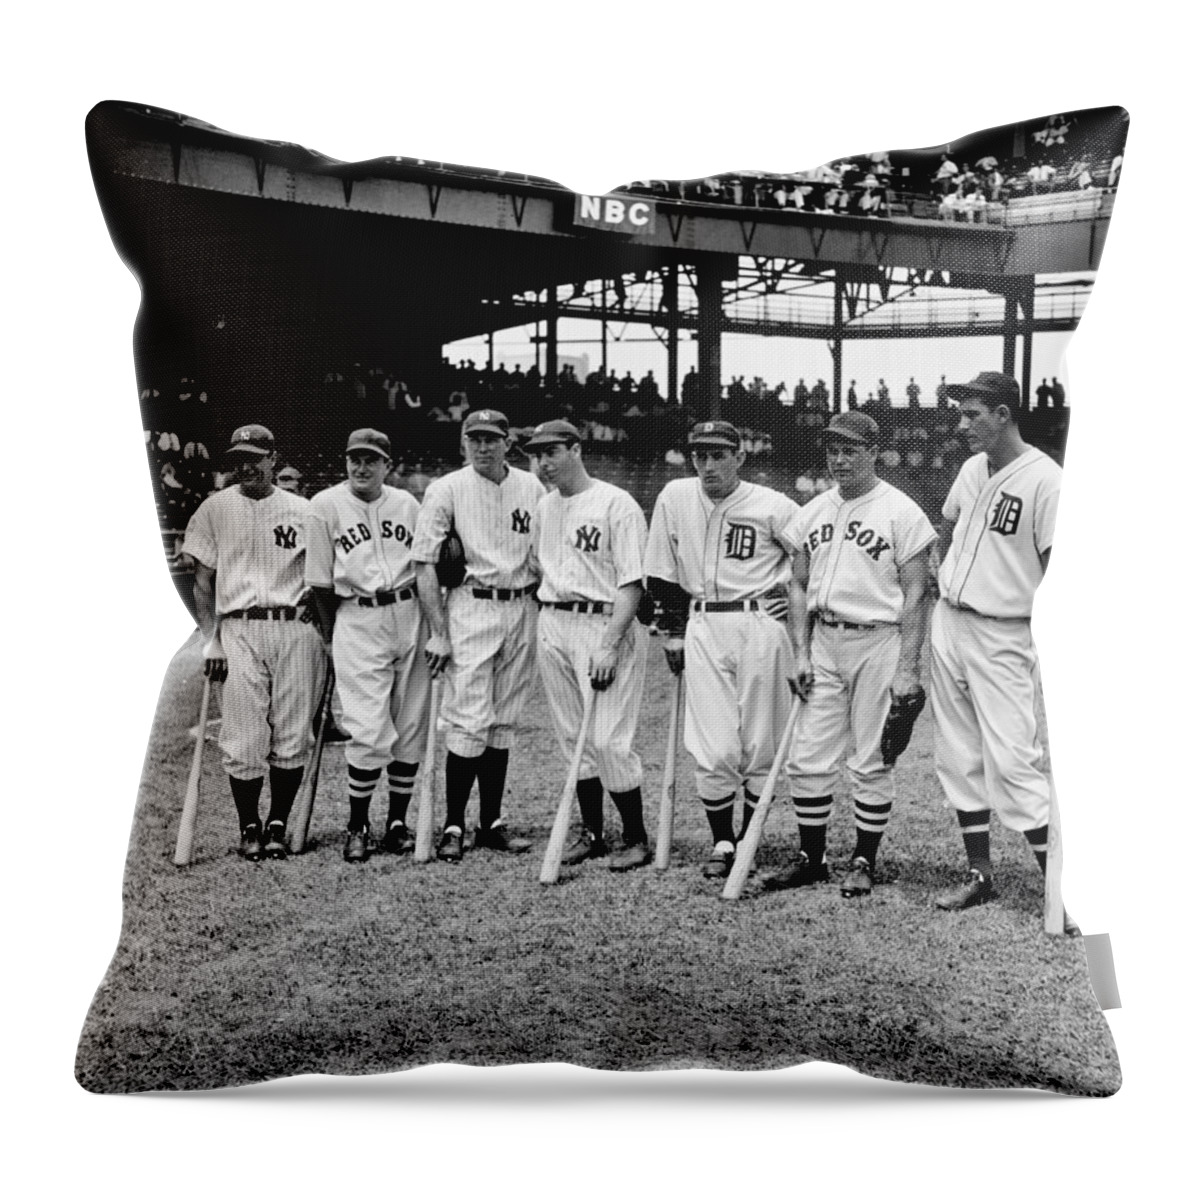 Baseball Throw Pillow featuring the photograph Legends by Benjamin Yeager